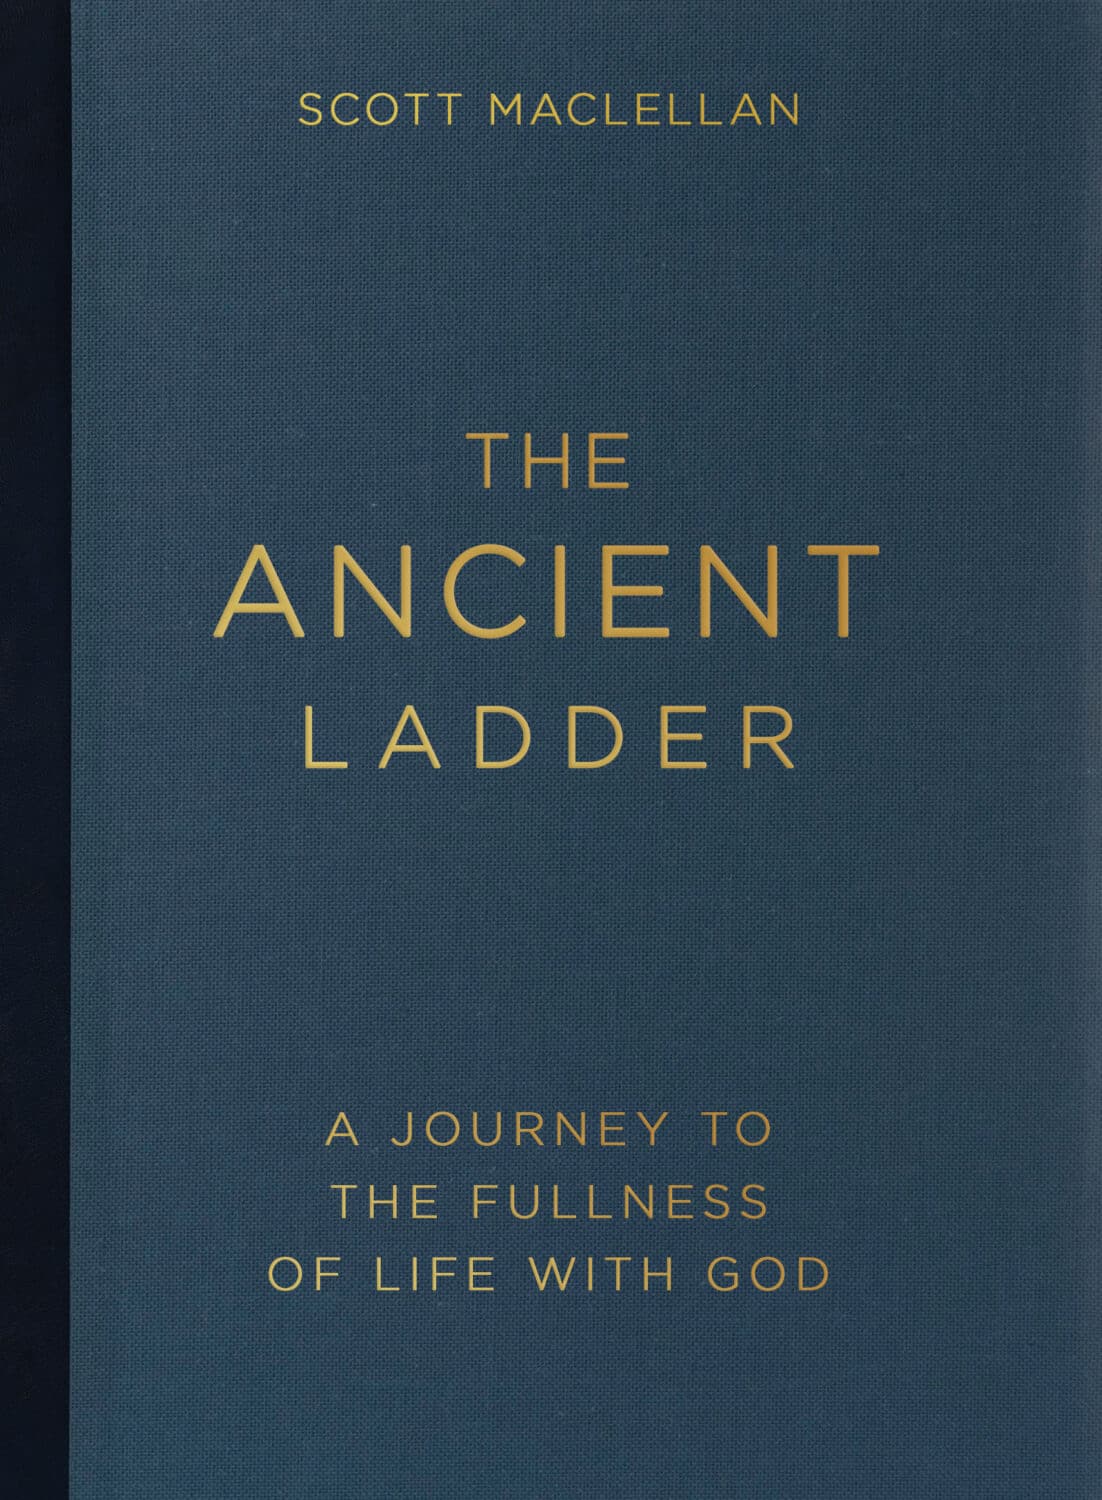 ancient ladder book cover image